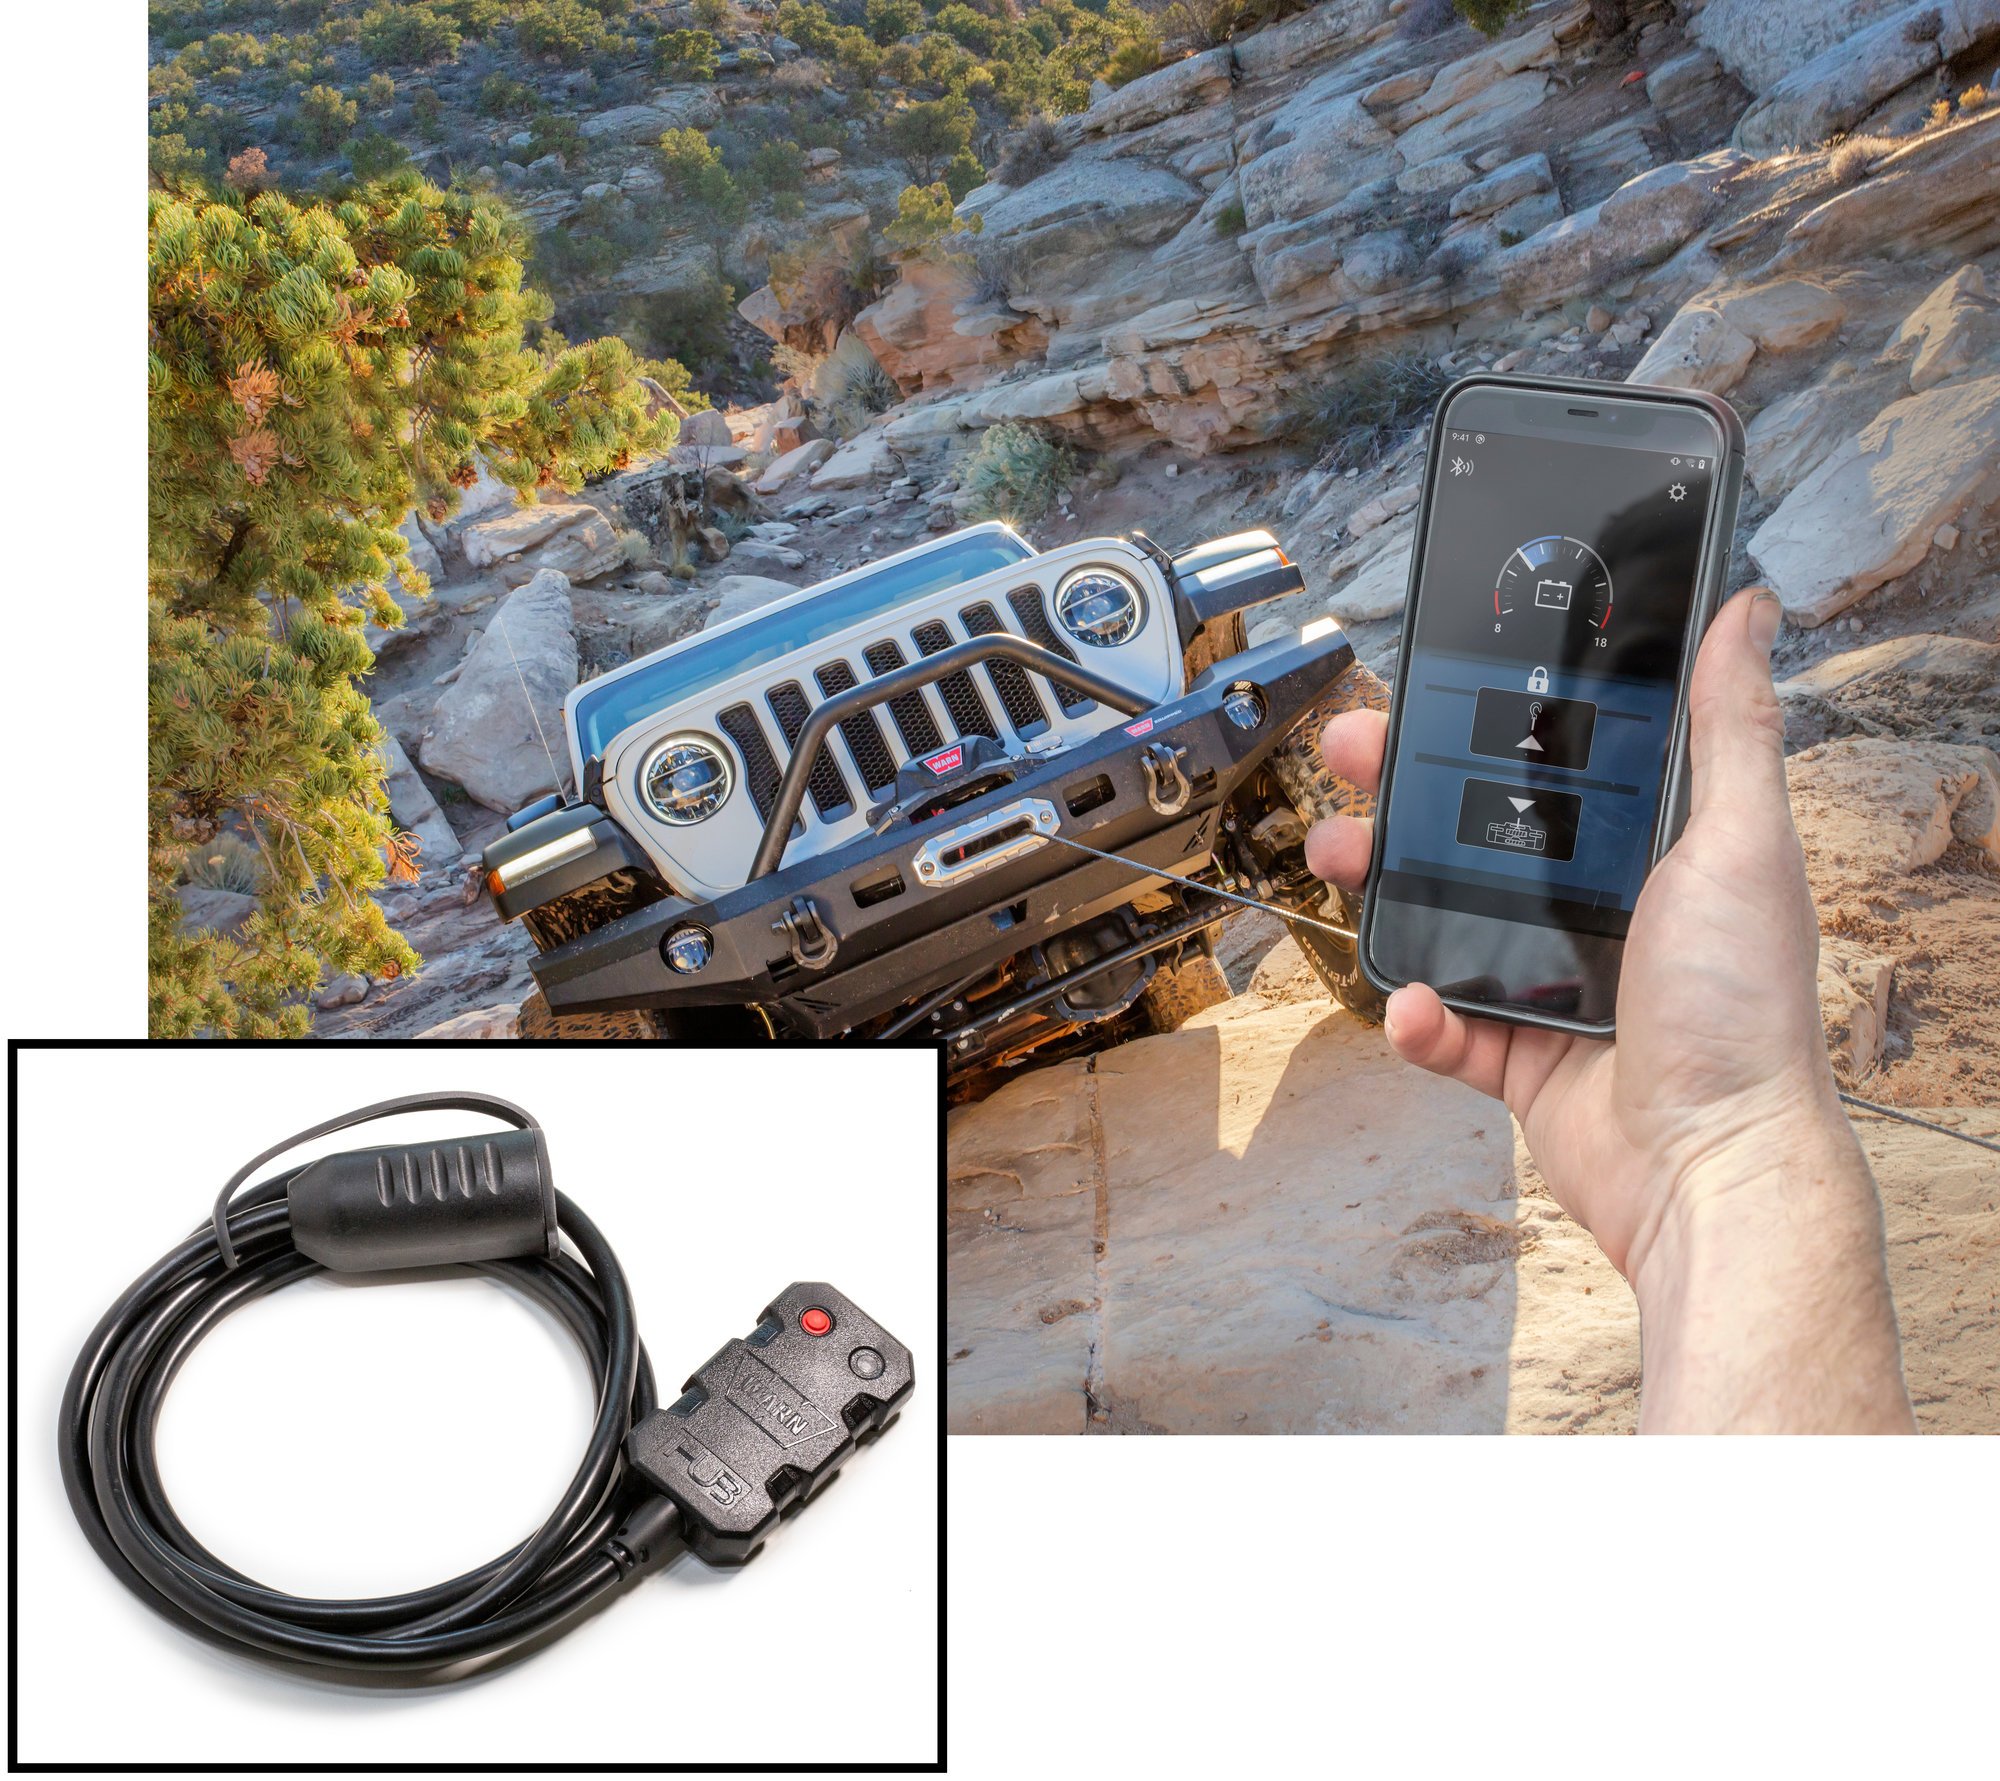 WARN 103945 HUB Wireless Receiver - Smart Phone Enabled Winch Controller  for Jeep, Truck, & SUV WARN Winches | Quadratec